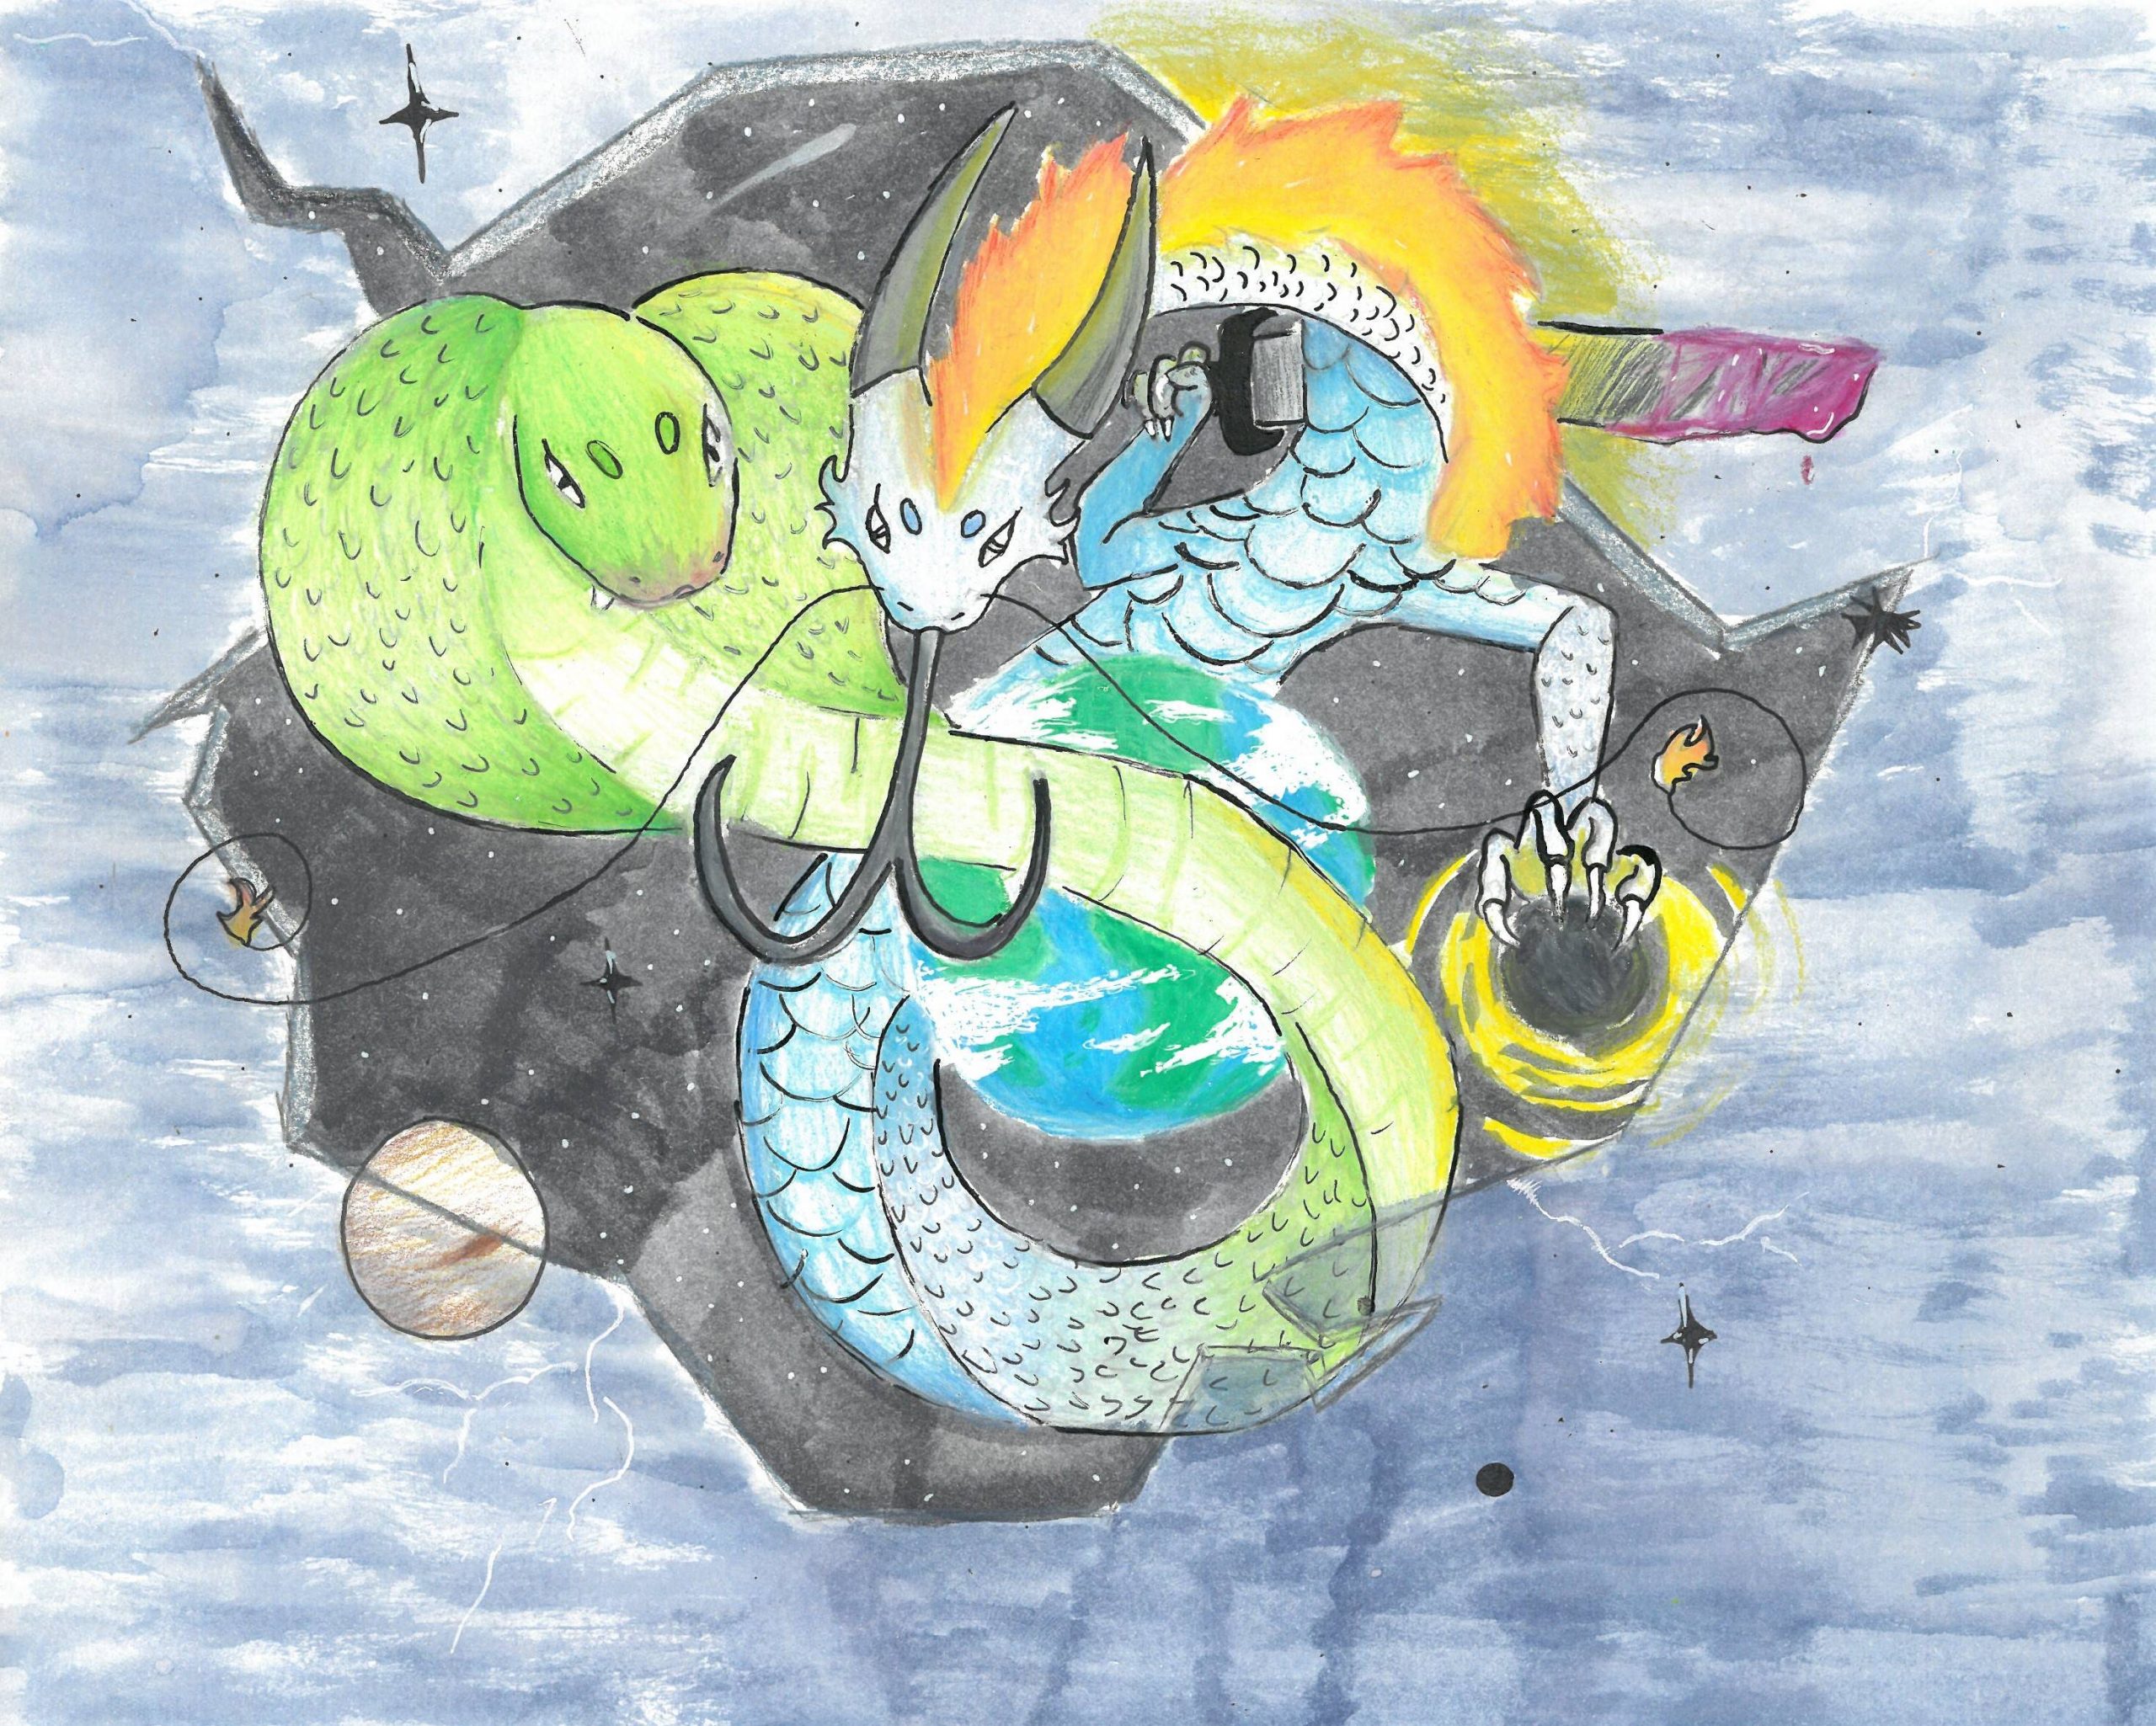 Drawing of dragon and snake creature surrounding the earth